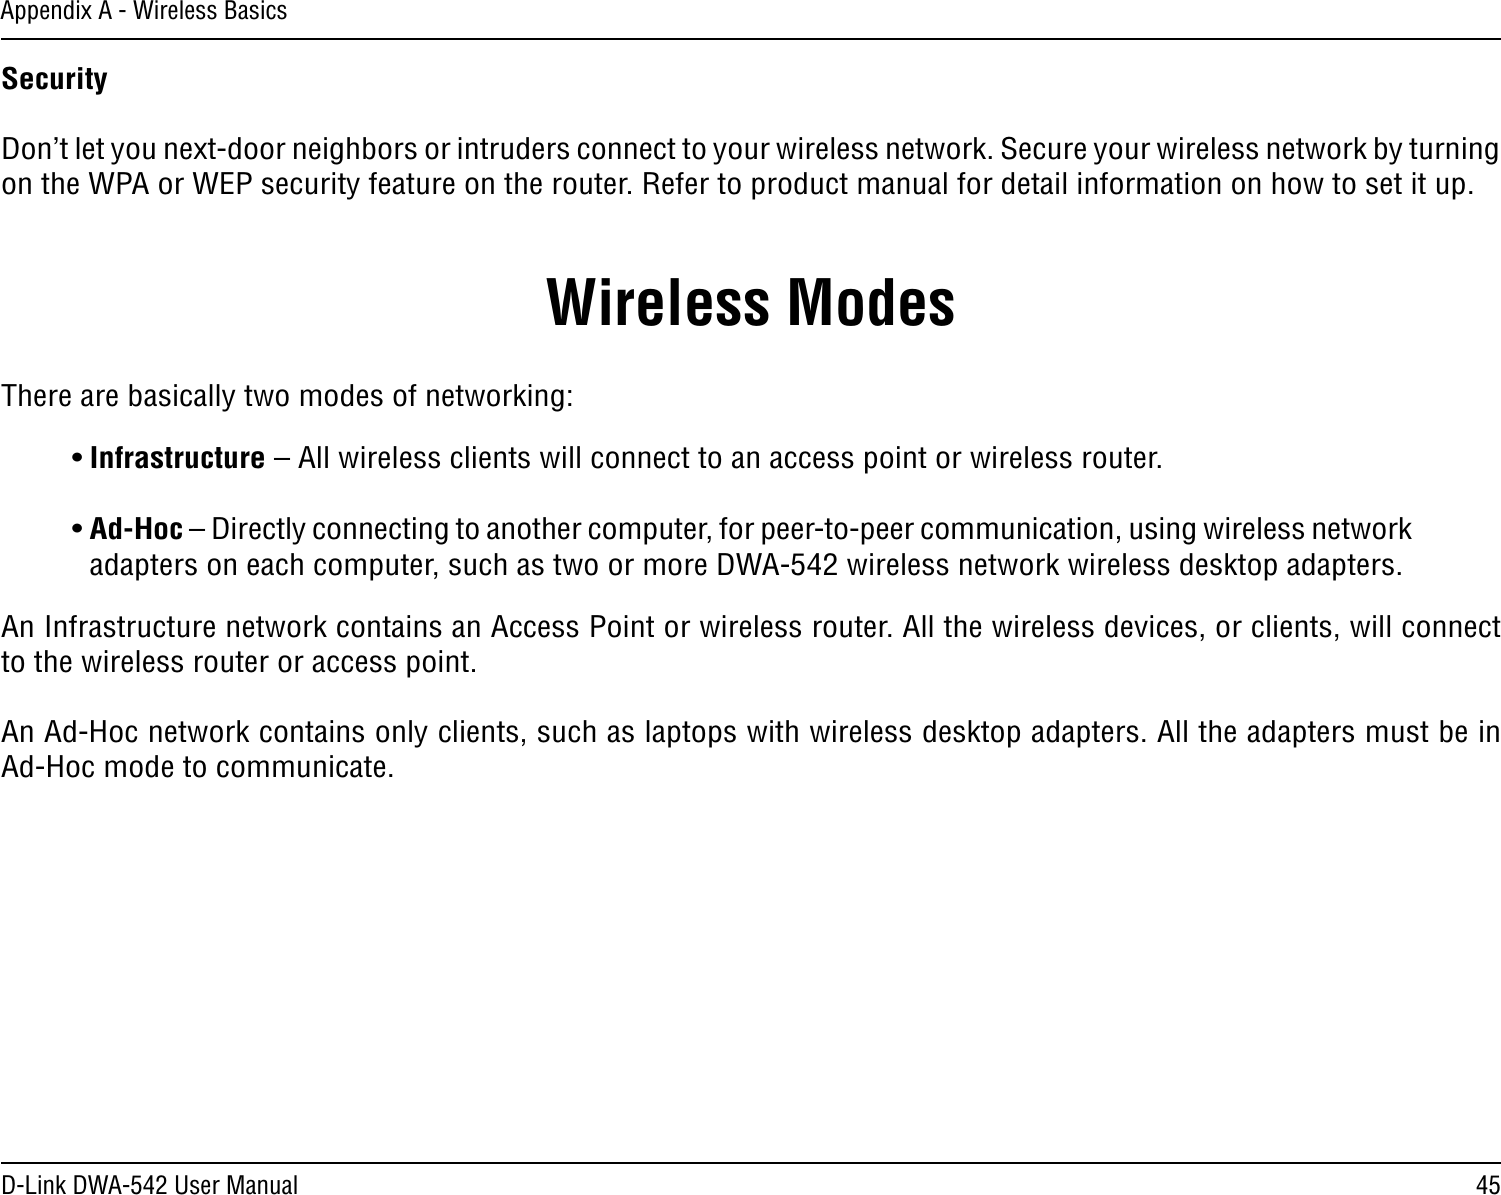 45D-Link DWA-542 User ManualAppendix A - Wireless BasicsSecurity   Don’t let you next-door neighbors or intruders connect to your wireless network. Secure your wireless network by turning on the WPA or WEP security feature on the router. Refer to product manual for detail information on how to set it up.There are basically two modes of networking: • Infrastructure – All wireless clients will connect to an access point or wireless router.• Ad-Hoc – Directly connecting to another computer, for peer-to-peer communication, using wireless network adapters on each computer, such as two or more DWA-542 wireless network wireless desktop adapters.An Infrastructure network contains an Access Point or wireless router. All the wireless devices, or clients, will connect to the wireless router or access point. An Ad-Hoc network contains only clients, such as laptops with wireless desktop adapters. All the adapters must be in Ad-Hoc mode to communicate.Wireless Modes